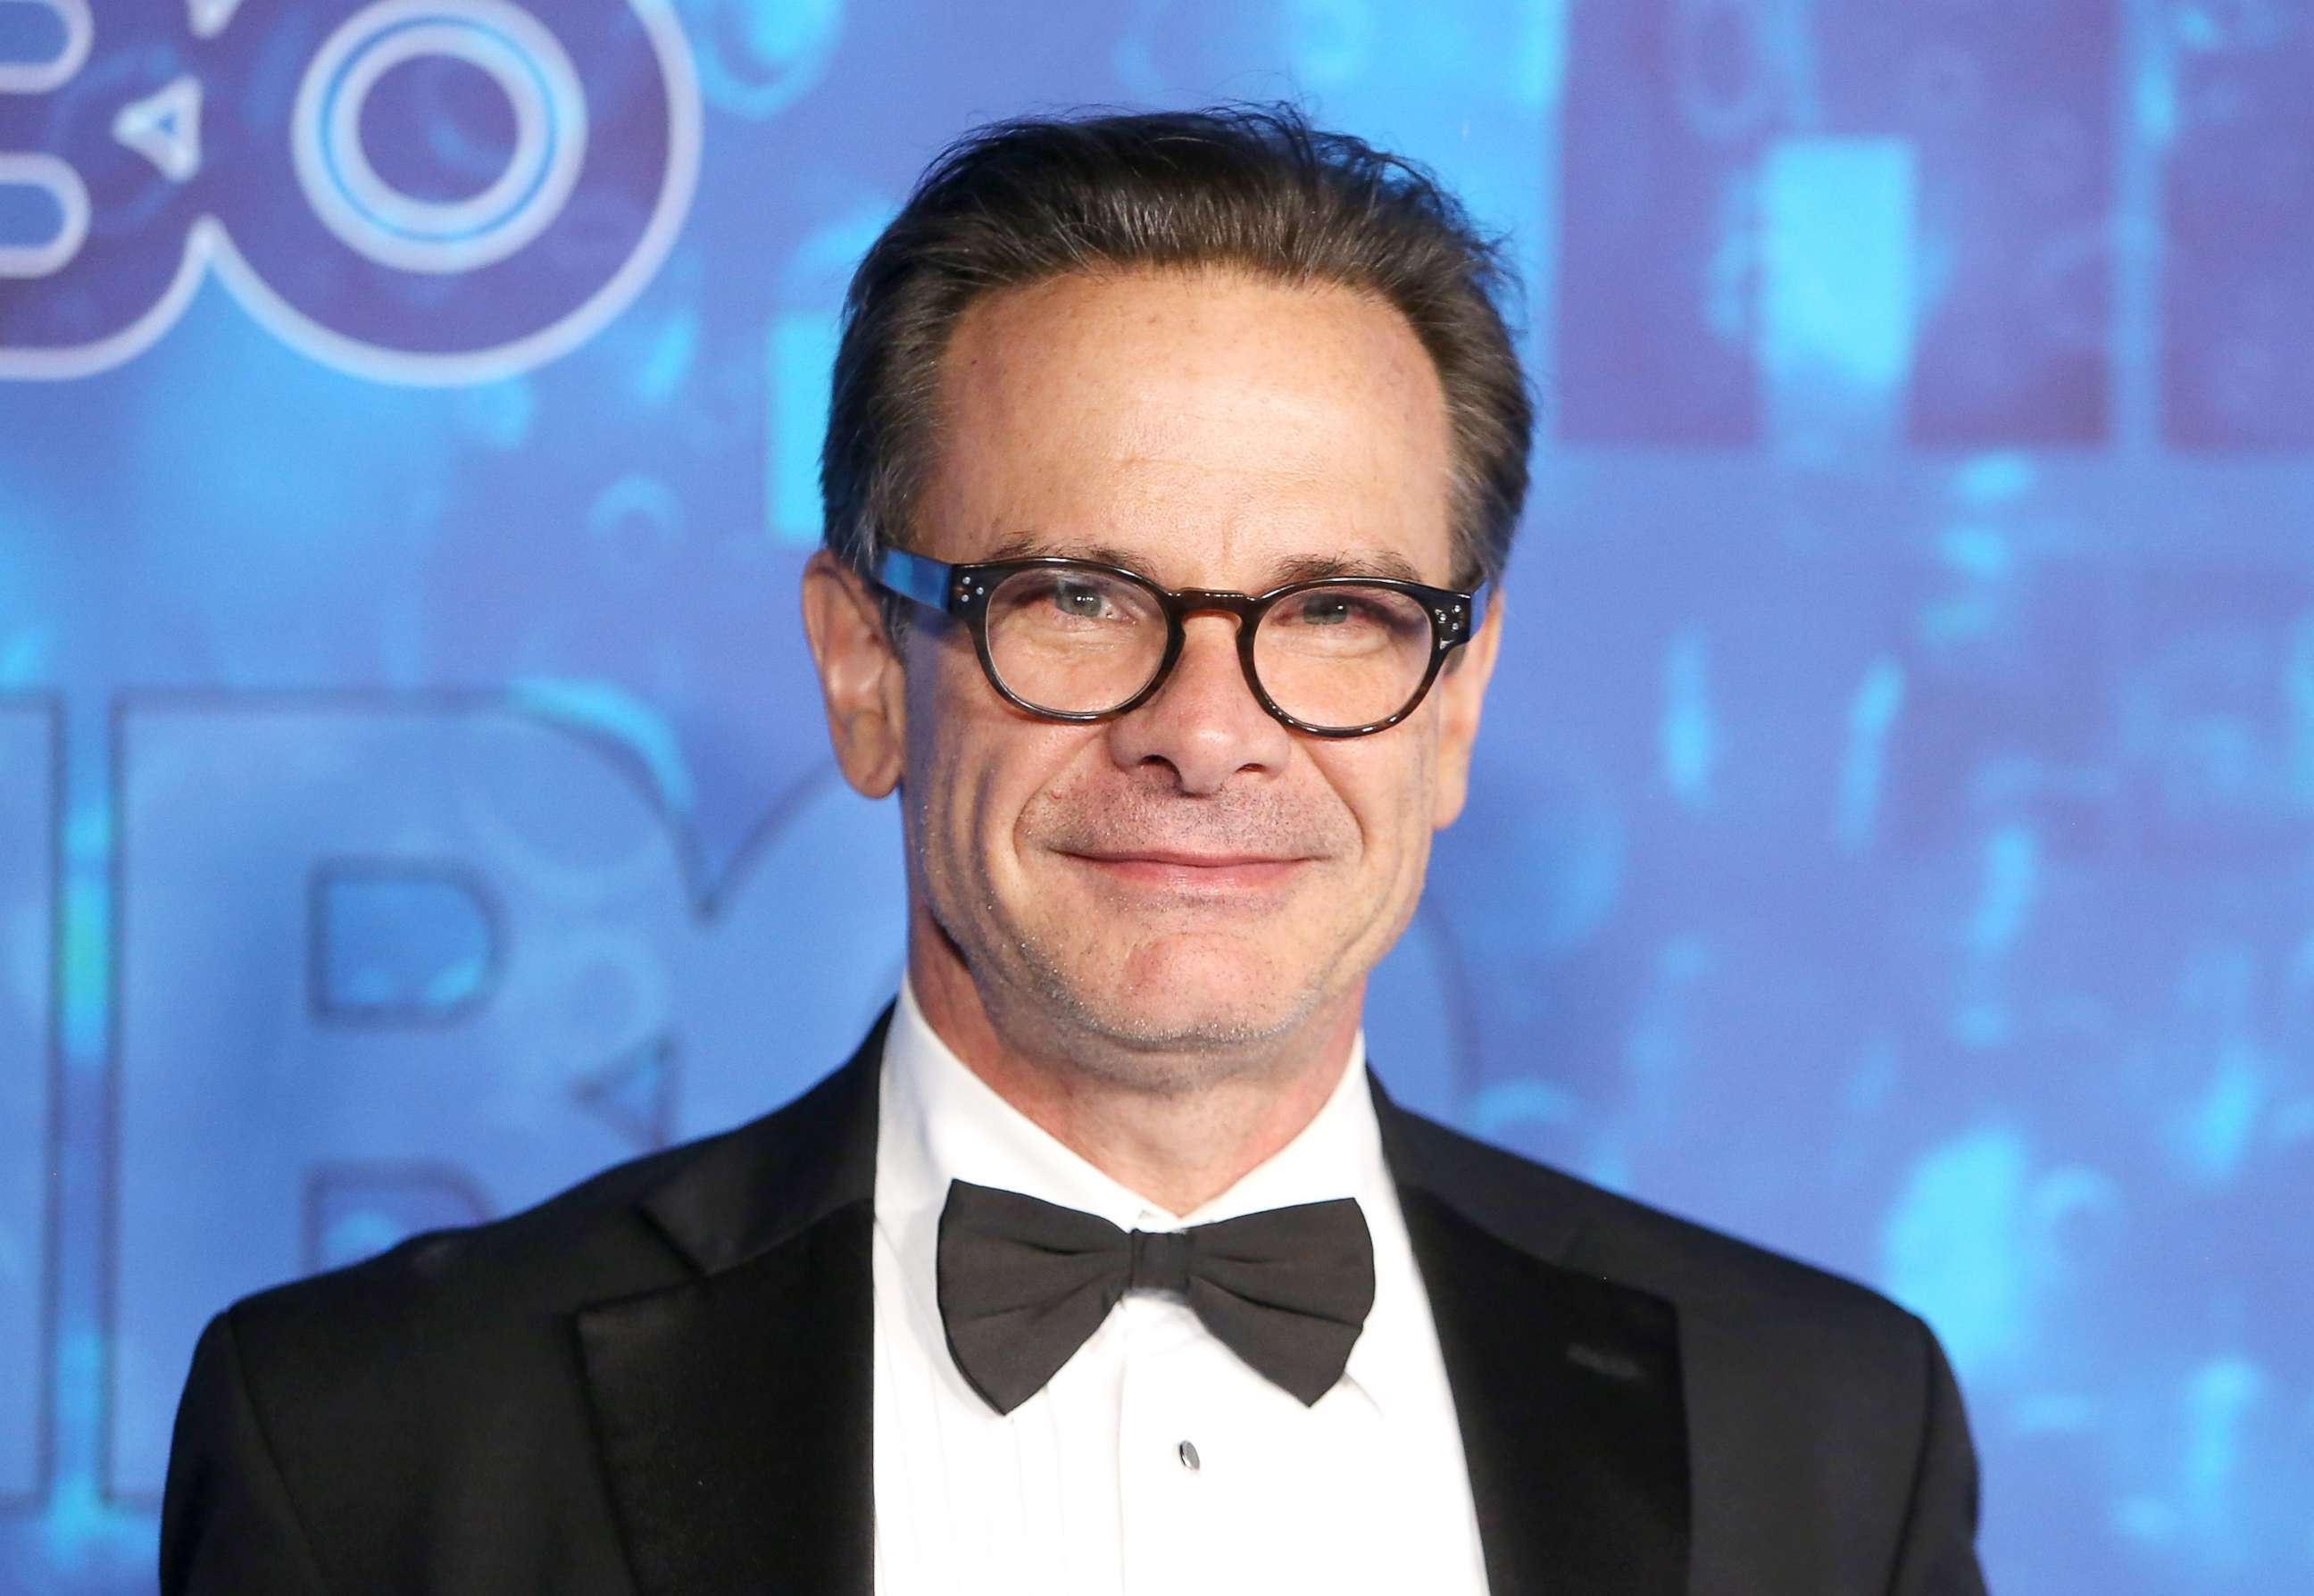 PHOTO: Peter Scolari arrives at HBO's Post Emmy Awards reception held at The Plaza at the Pacific Design Center, Sept. 18, 2016, in Los Angeles.